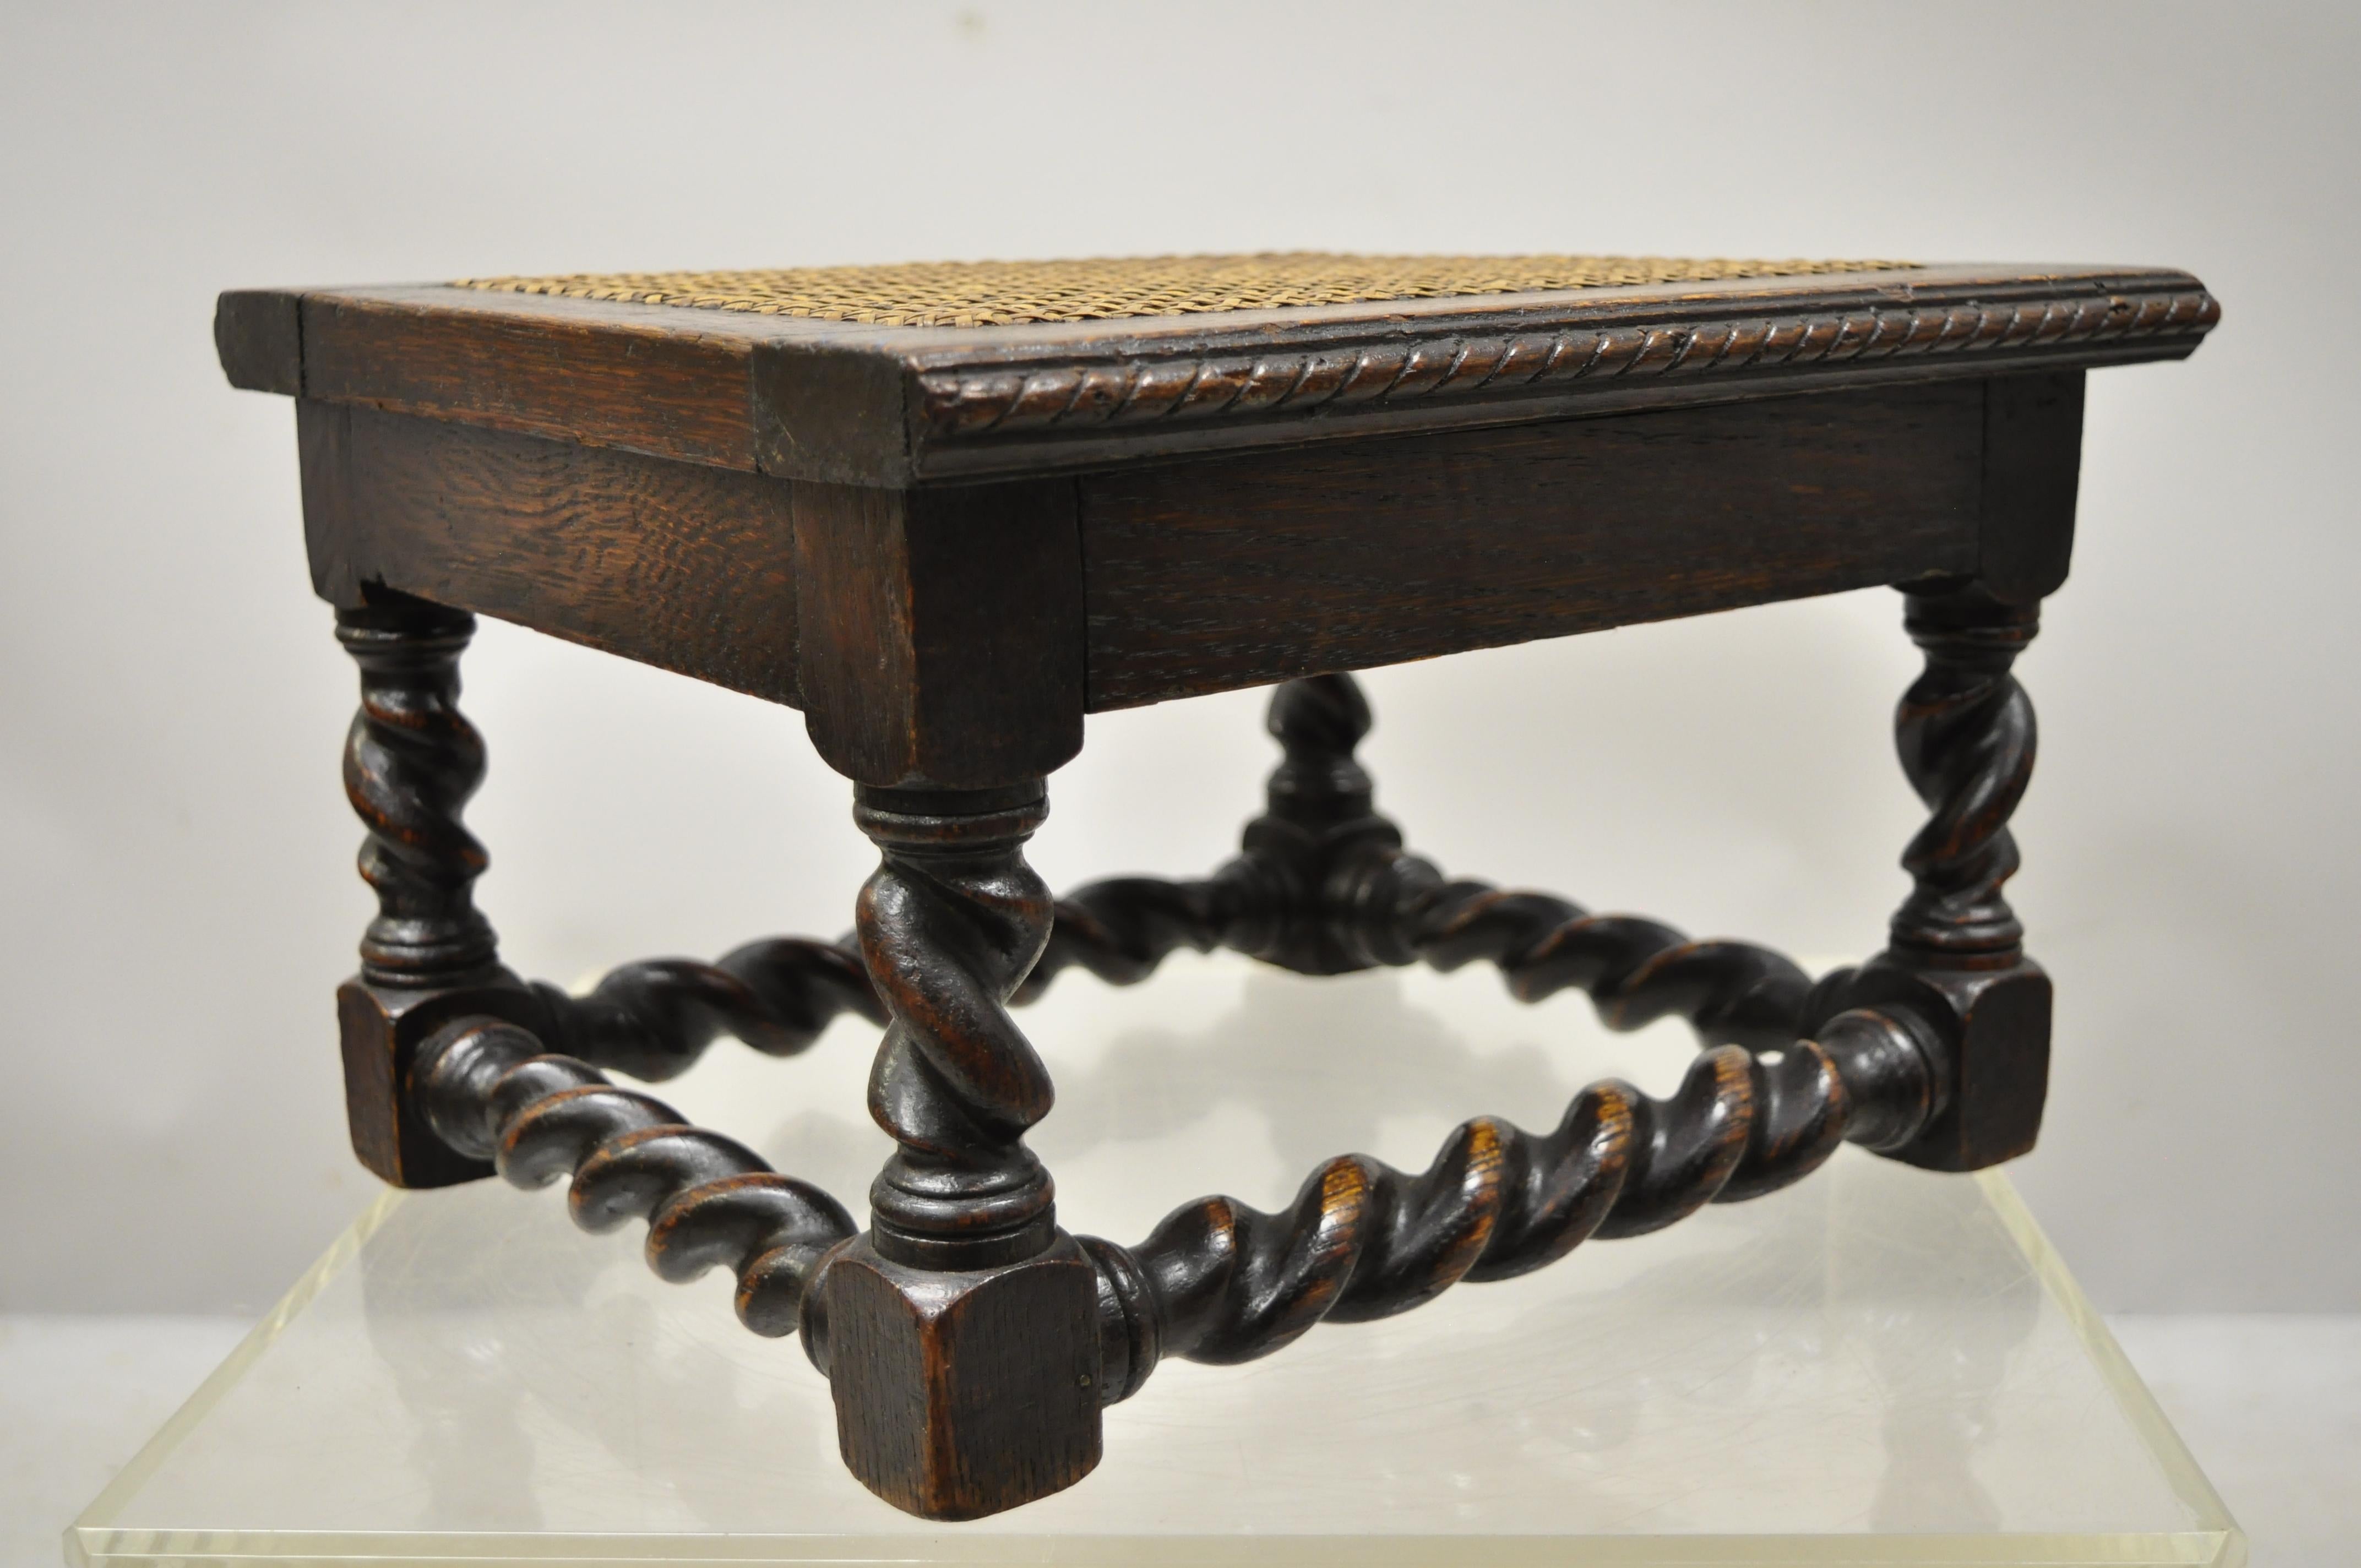 Antique English Jacobean Carved barley twist small footstool ottoman with cane seat. Item features a cane seat, remarkable patina, barley twist carved legs and stretcher, solid wood construction, beautiful wood grain, nicely carved details, very